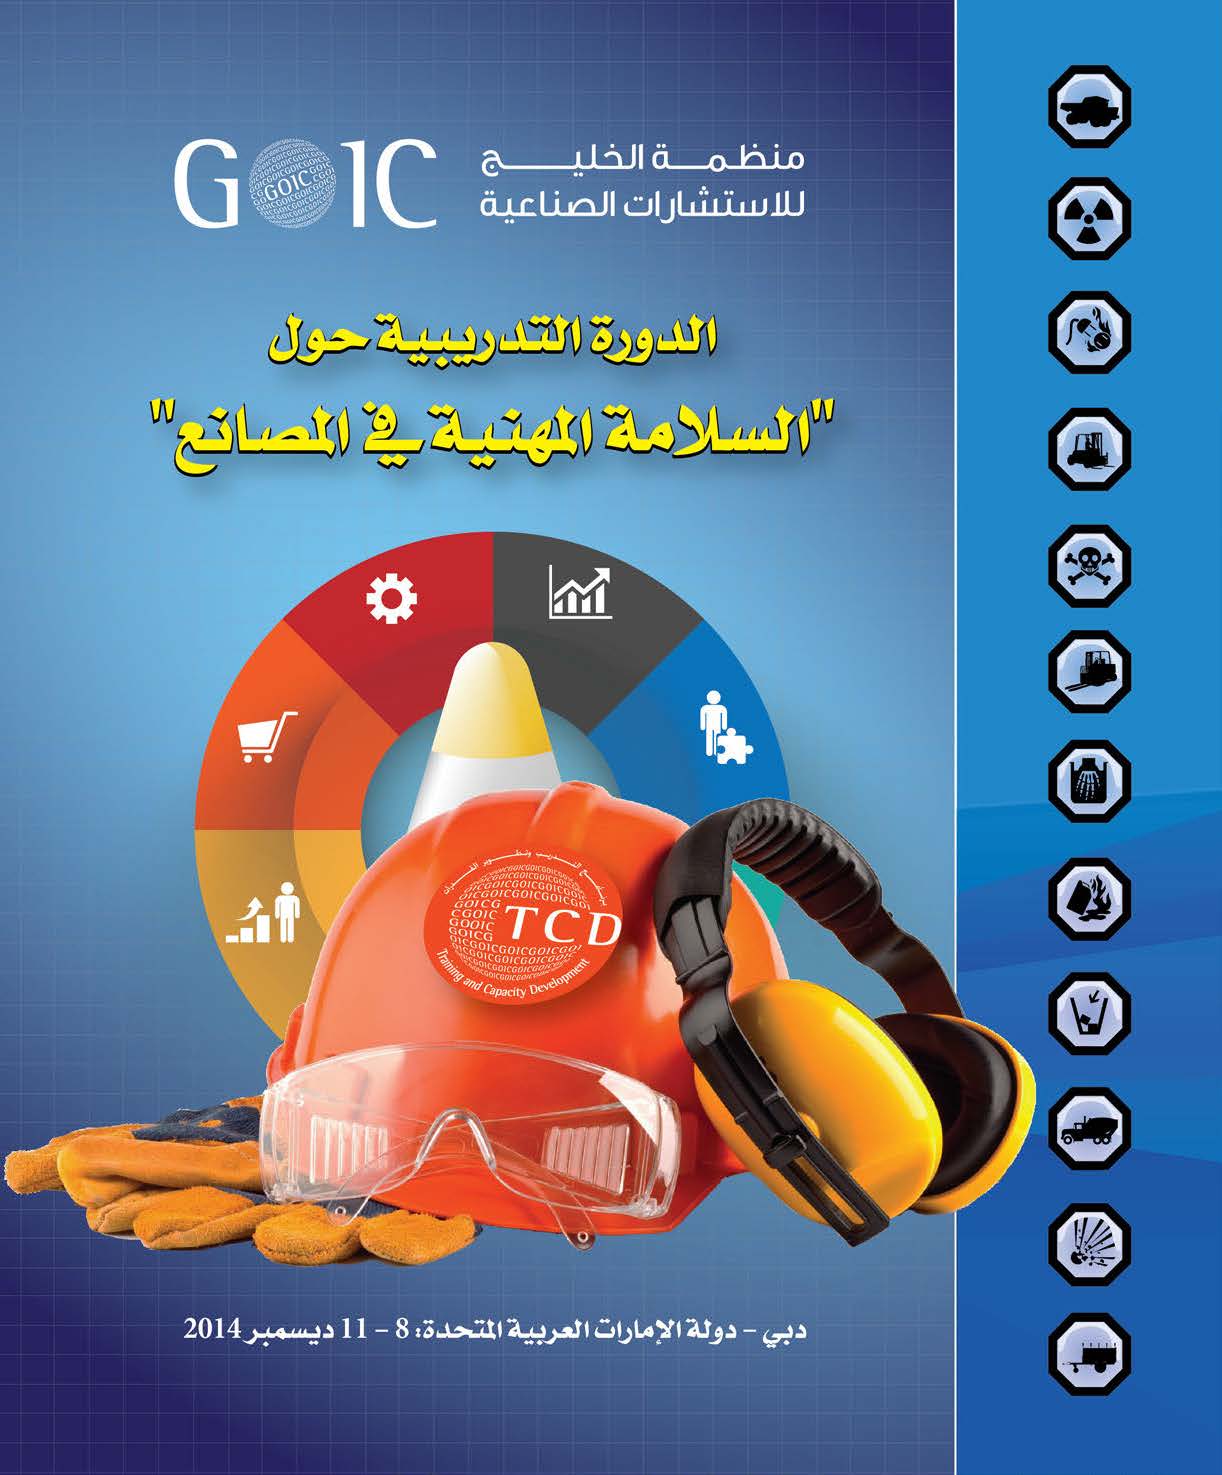 GOIC holds a workshop about “Occupational Safety in Firms” in Dubai